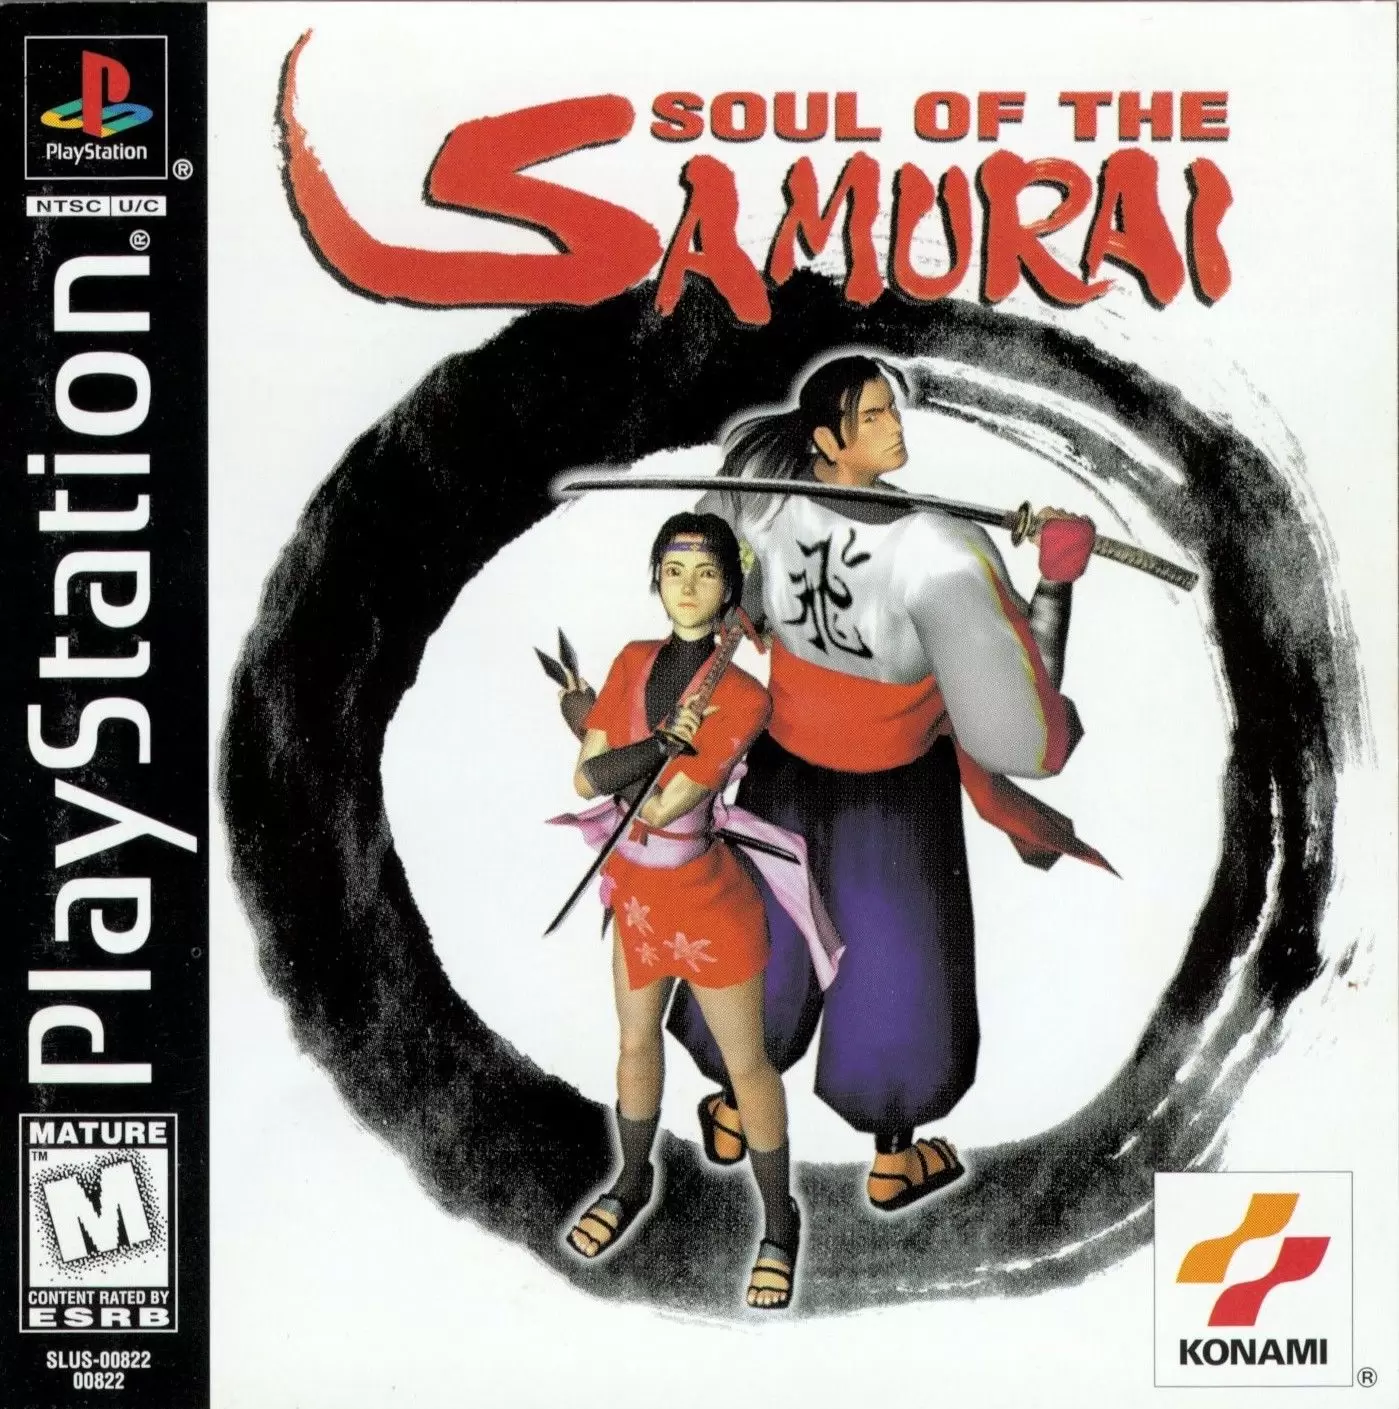 Playstation games - Soul of the Samurai